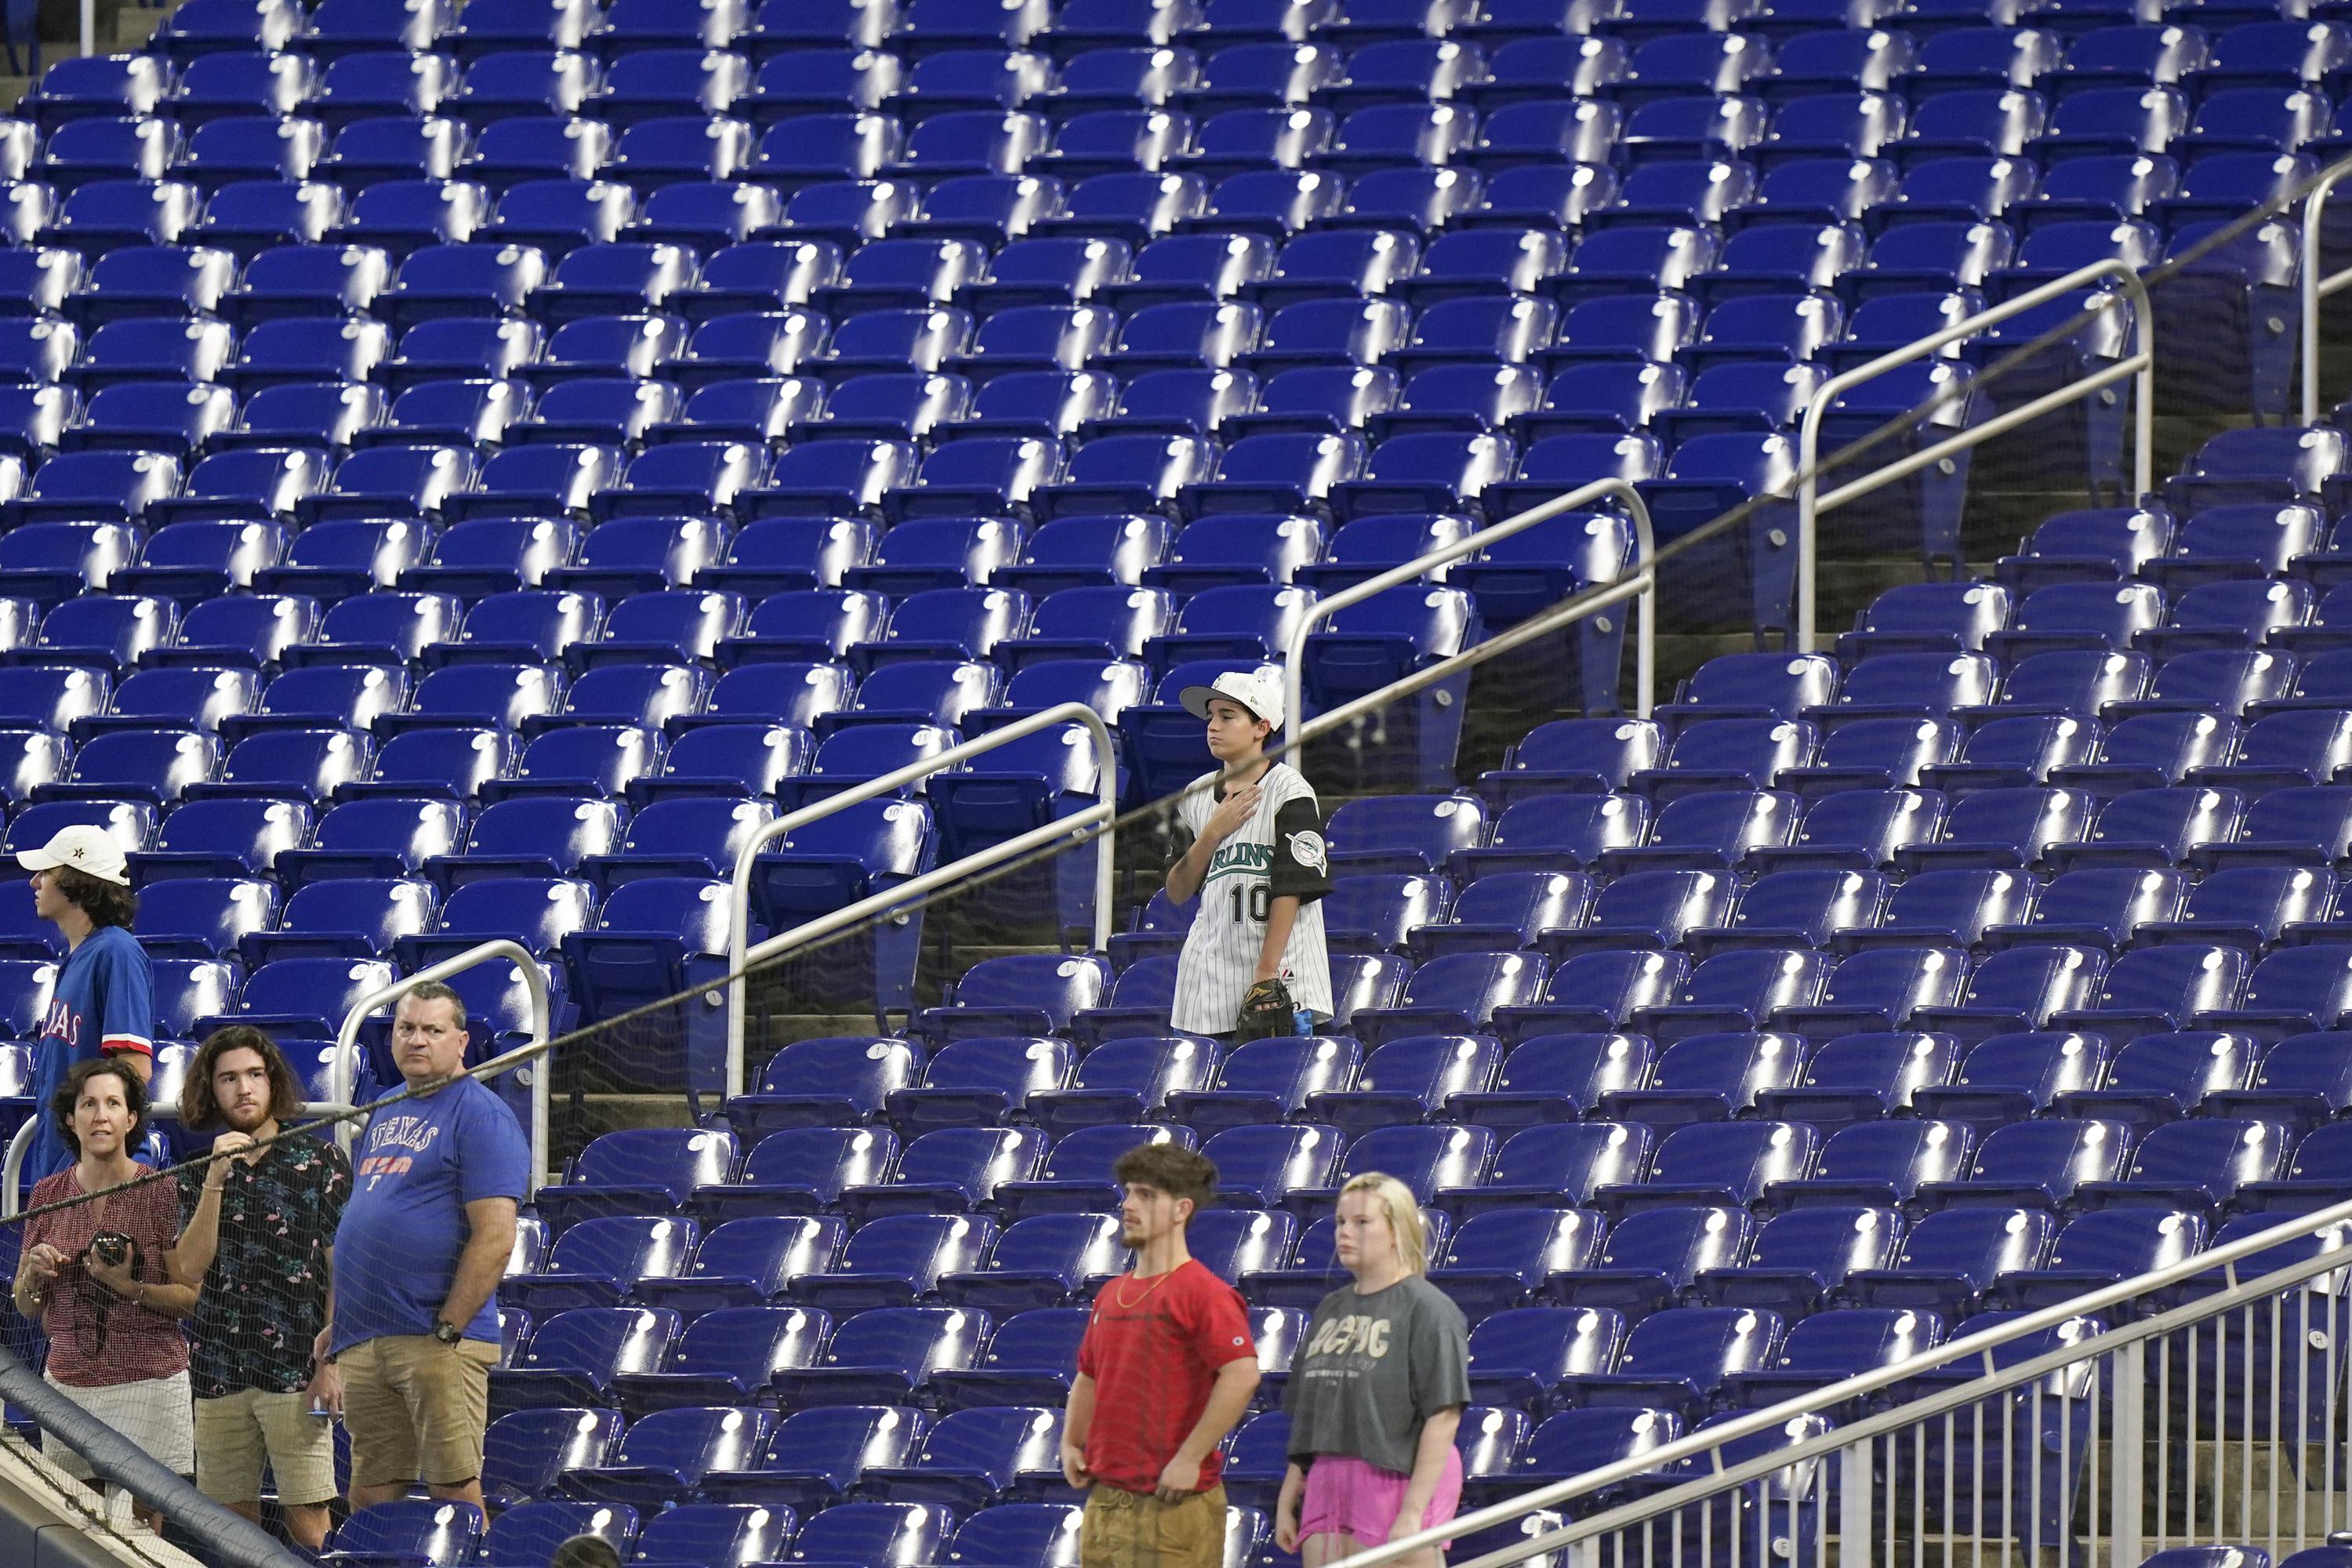 MLB struggling to get attendance back to prepandemic levels AP News